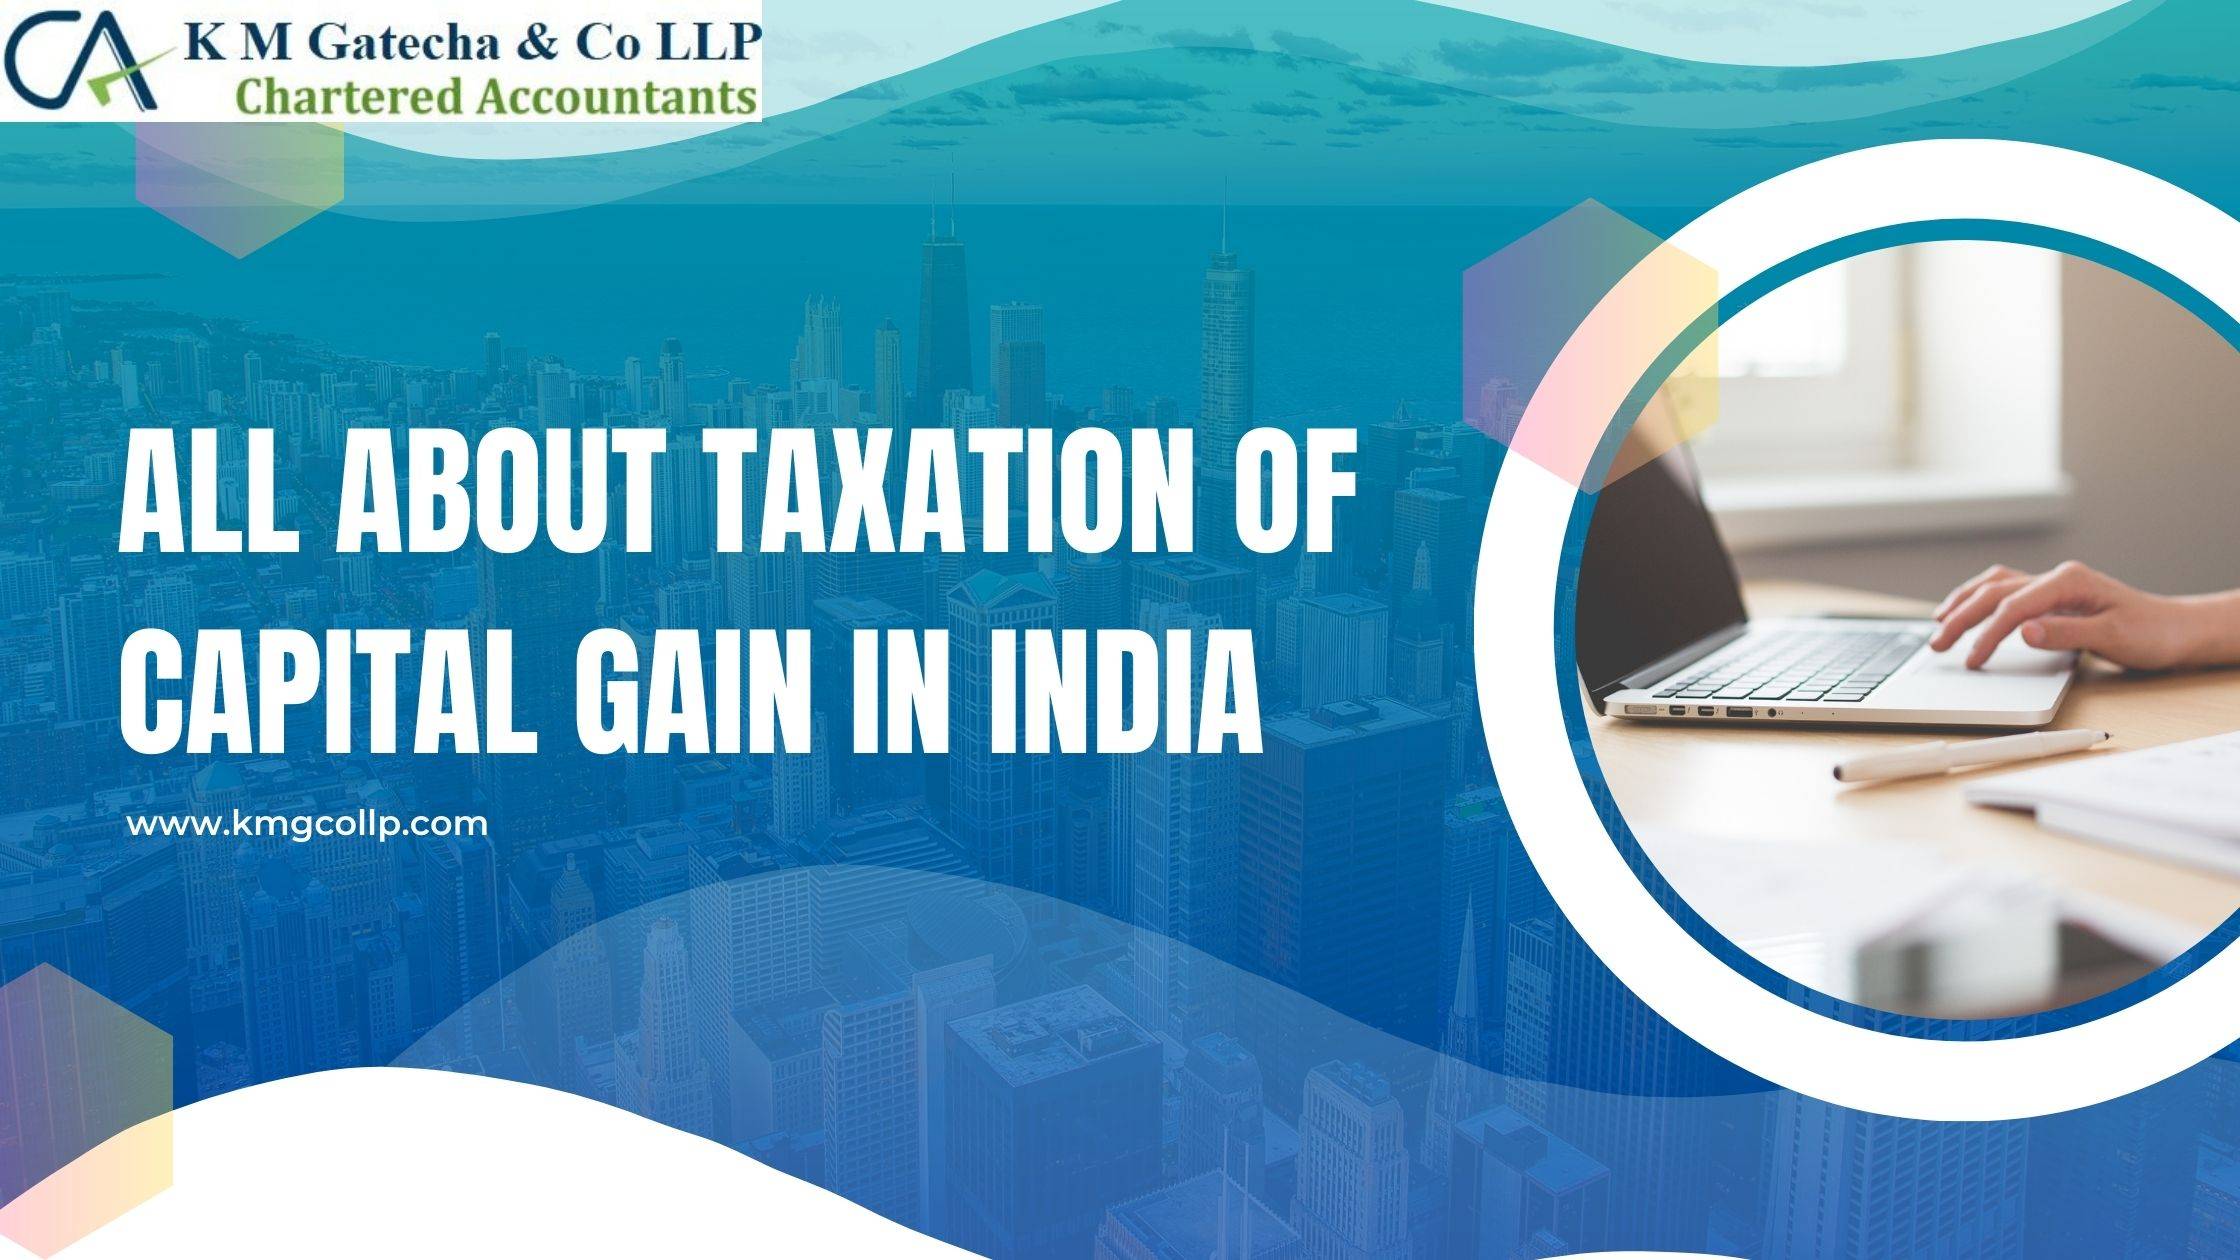 All about taxation of capital gain in India